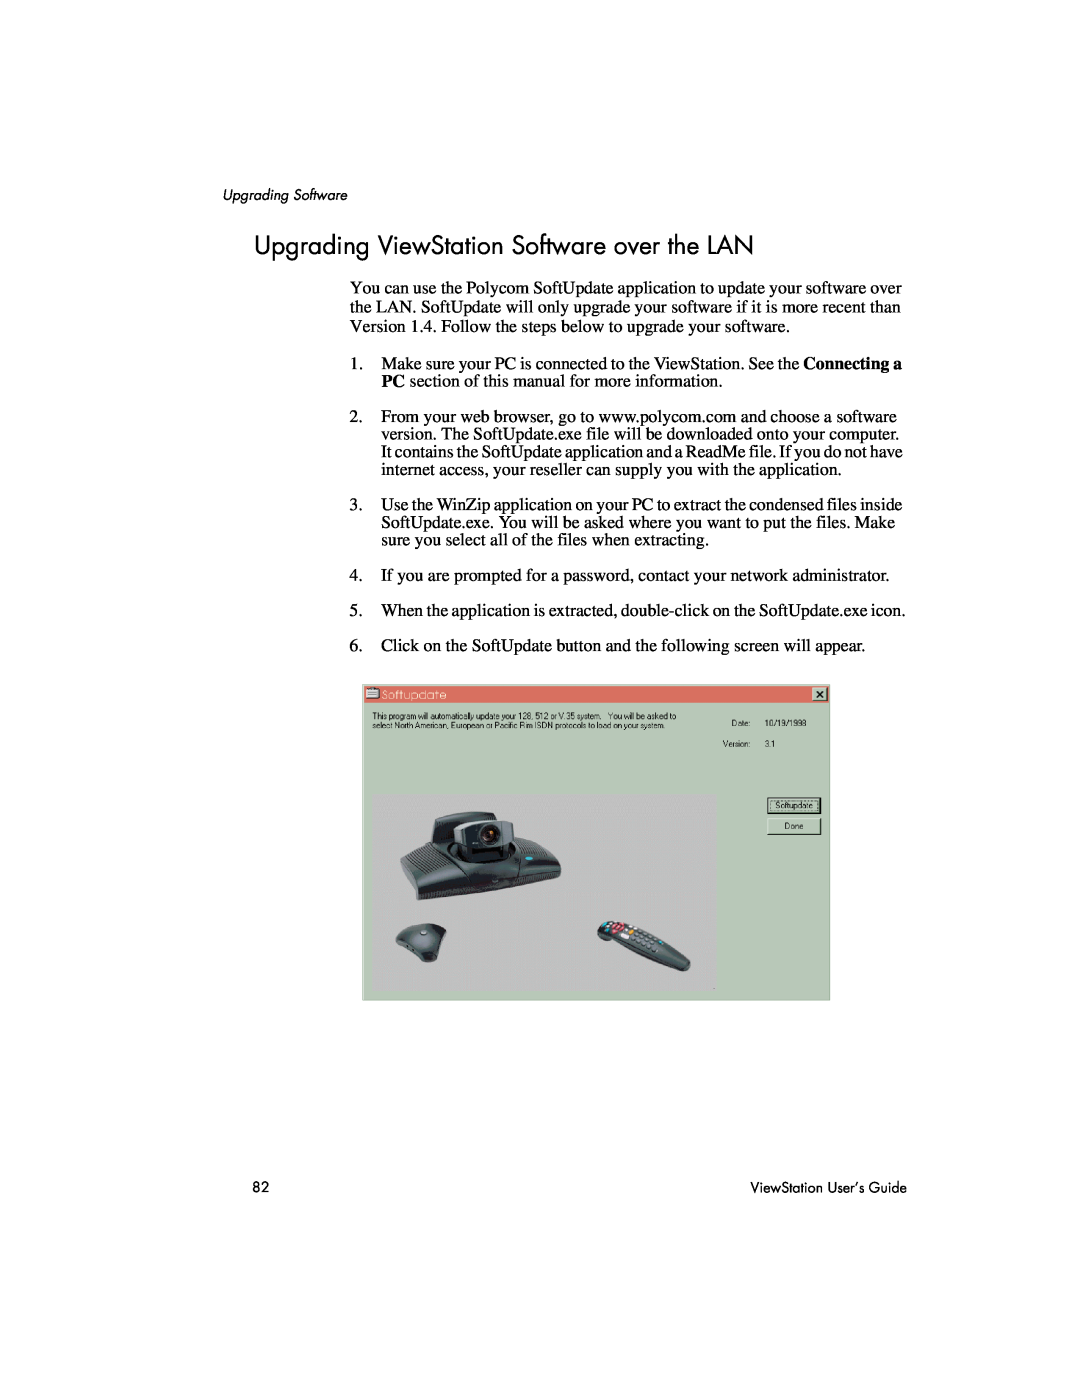 Polycom 512, 128, MP manual Upgrading ViewStation Software over the LAN, Upgrading Software 